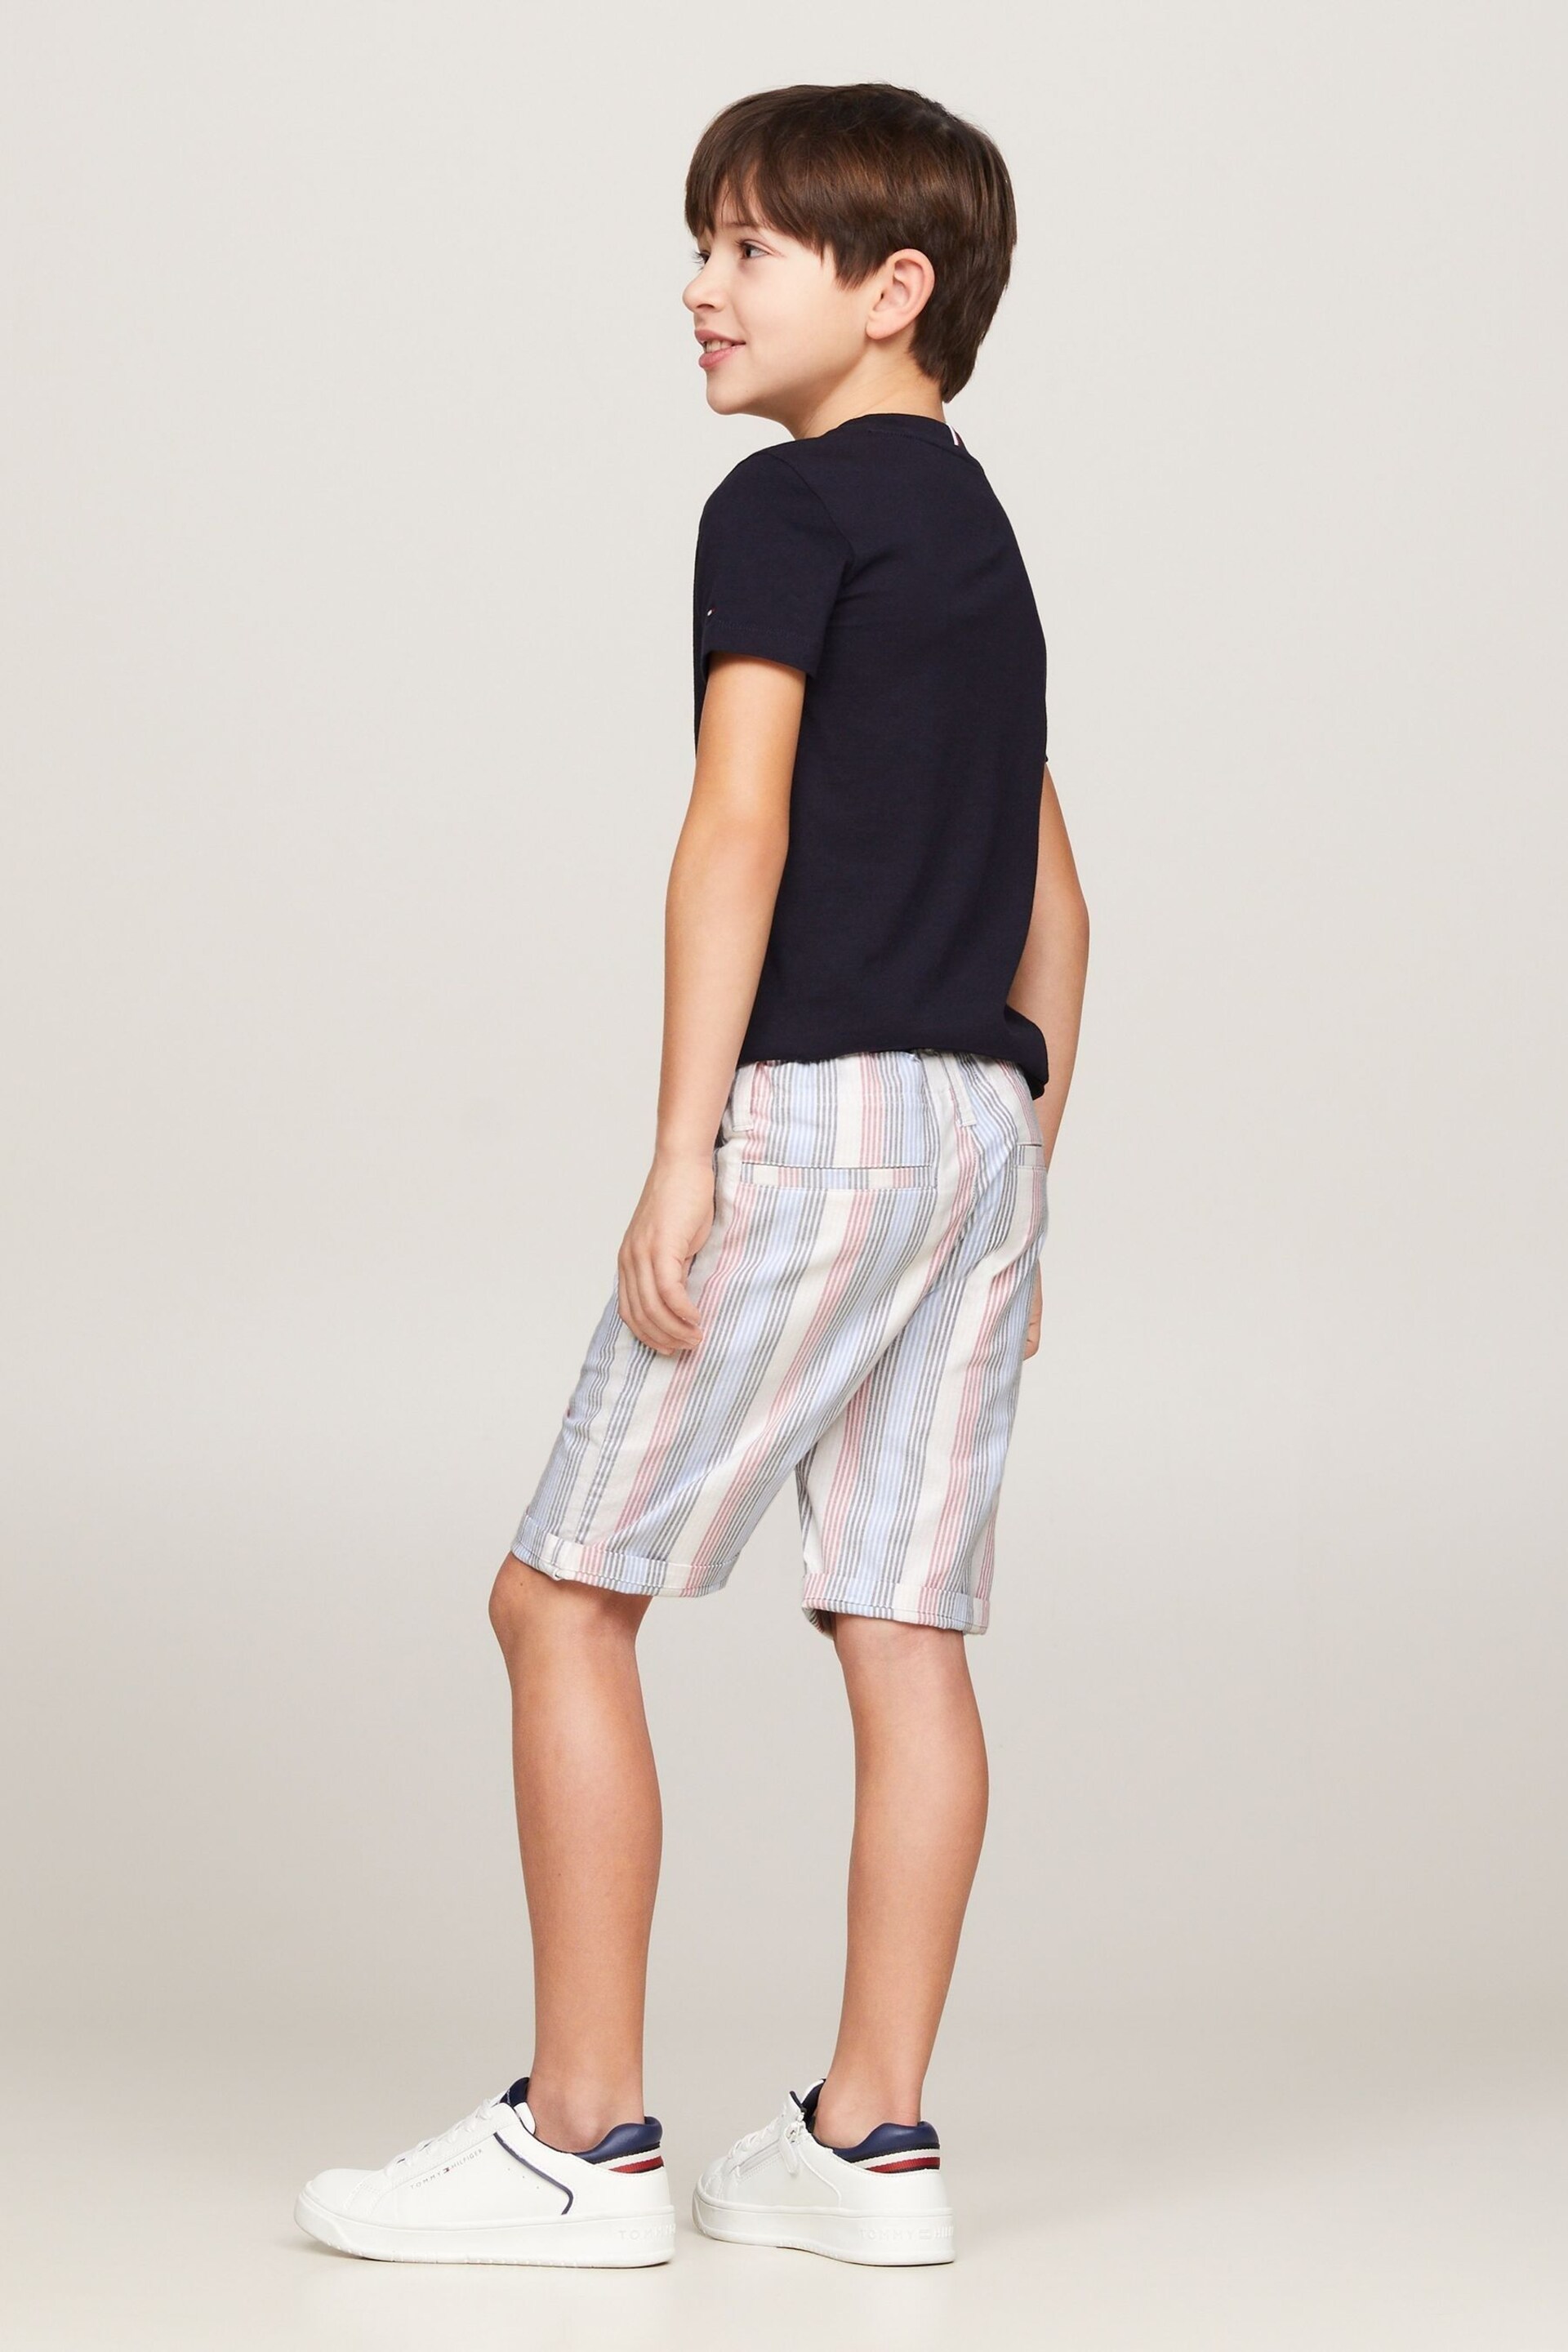 Tommy Hilfiger Cream Oxford Striped Shorts - Image 2 of 5